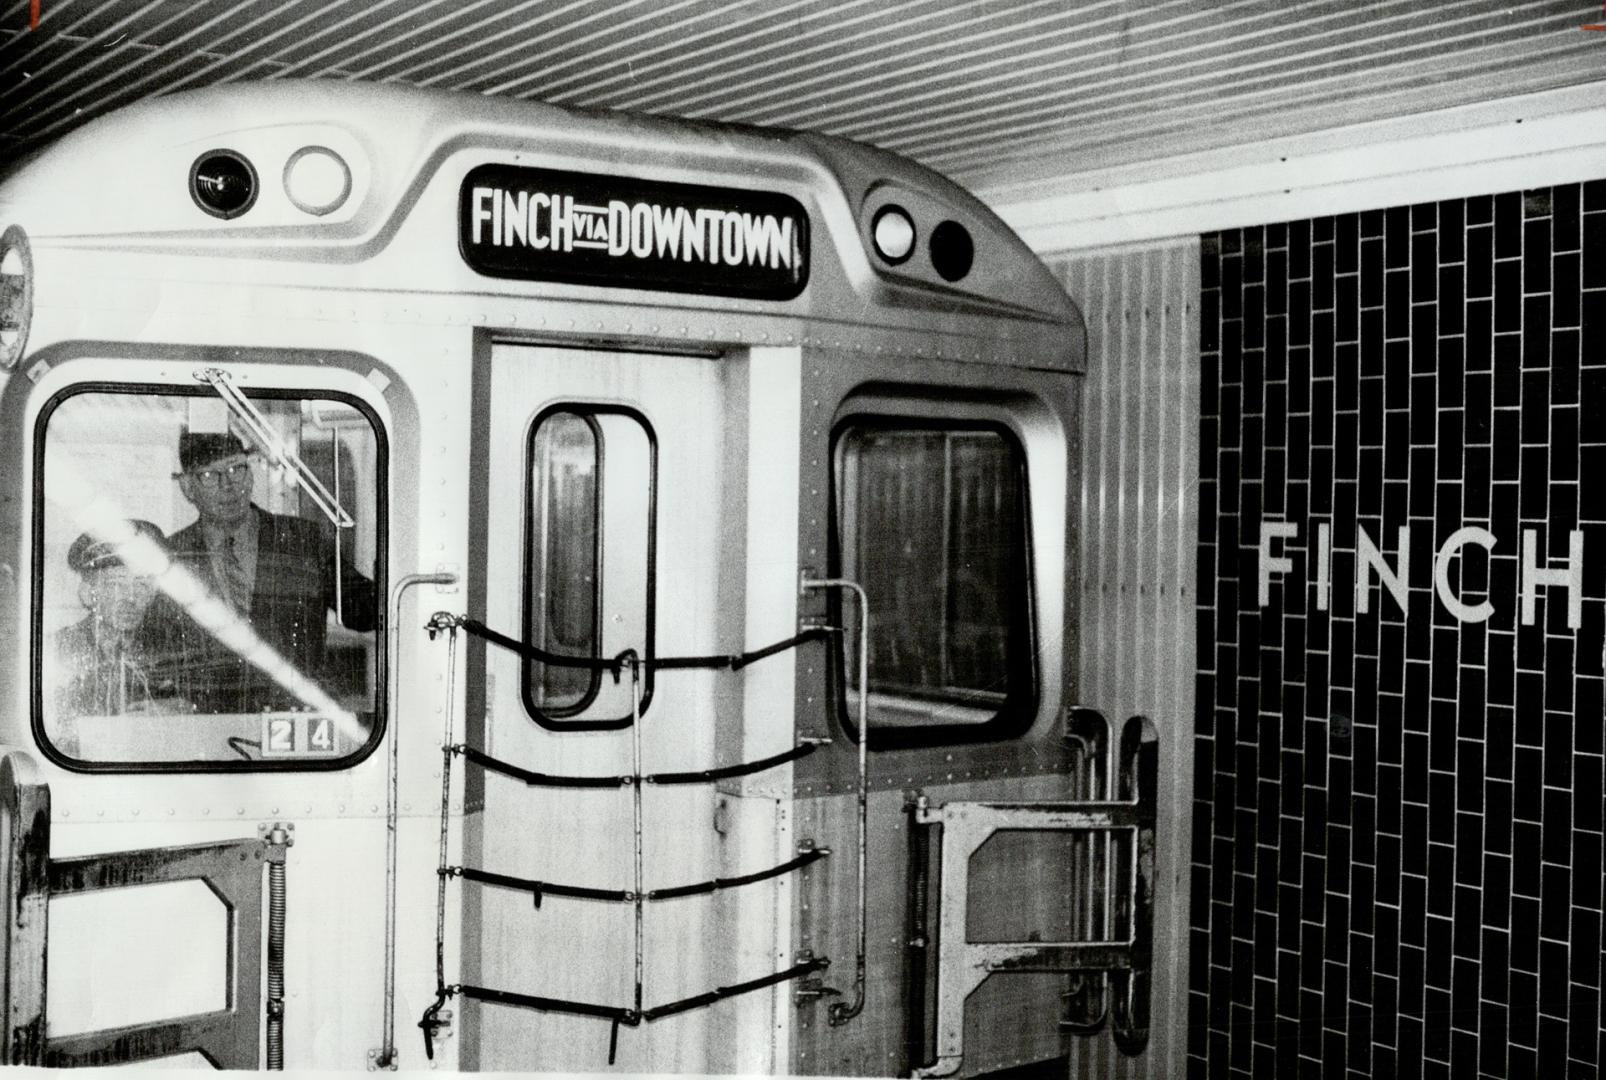 Twenty years after the first Toronto subway opened, the Yonge St